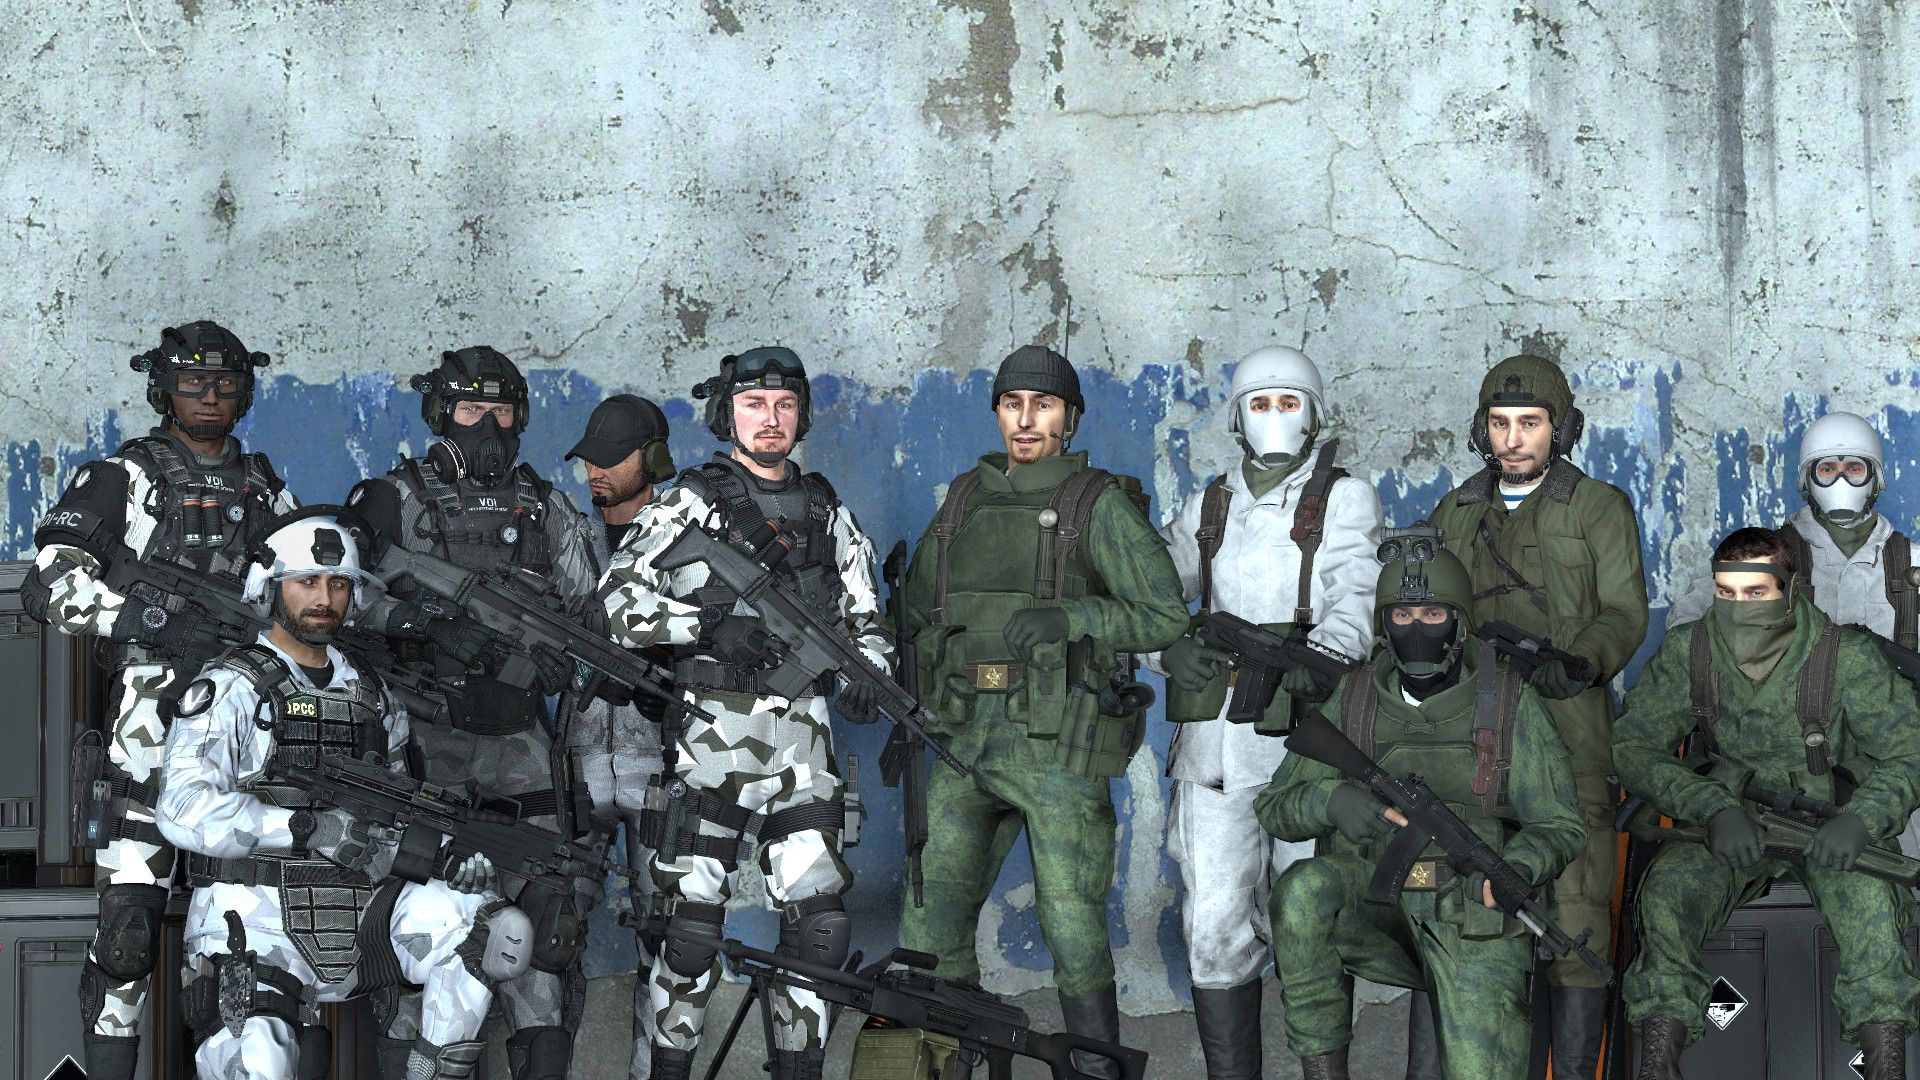 Steam Community - Screenshot - Members Of The 1st Joint VDI TPA Battalion, 3rd Company, Pose For A Quick Picture Before Heading Out On Patrol In Central Moscow